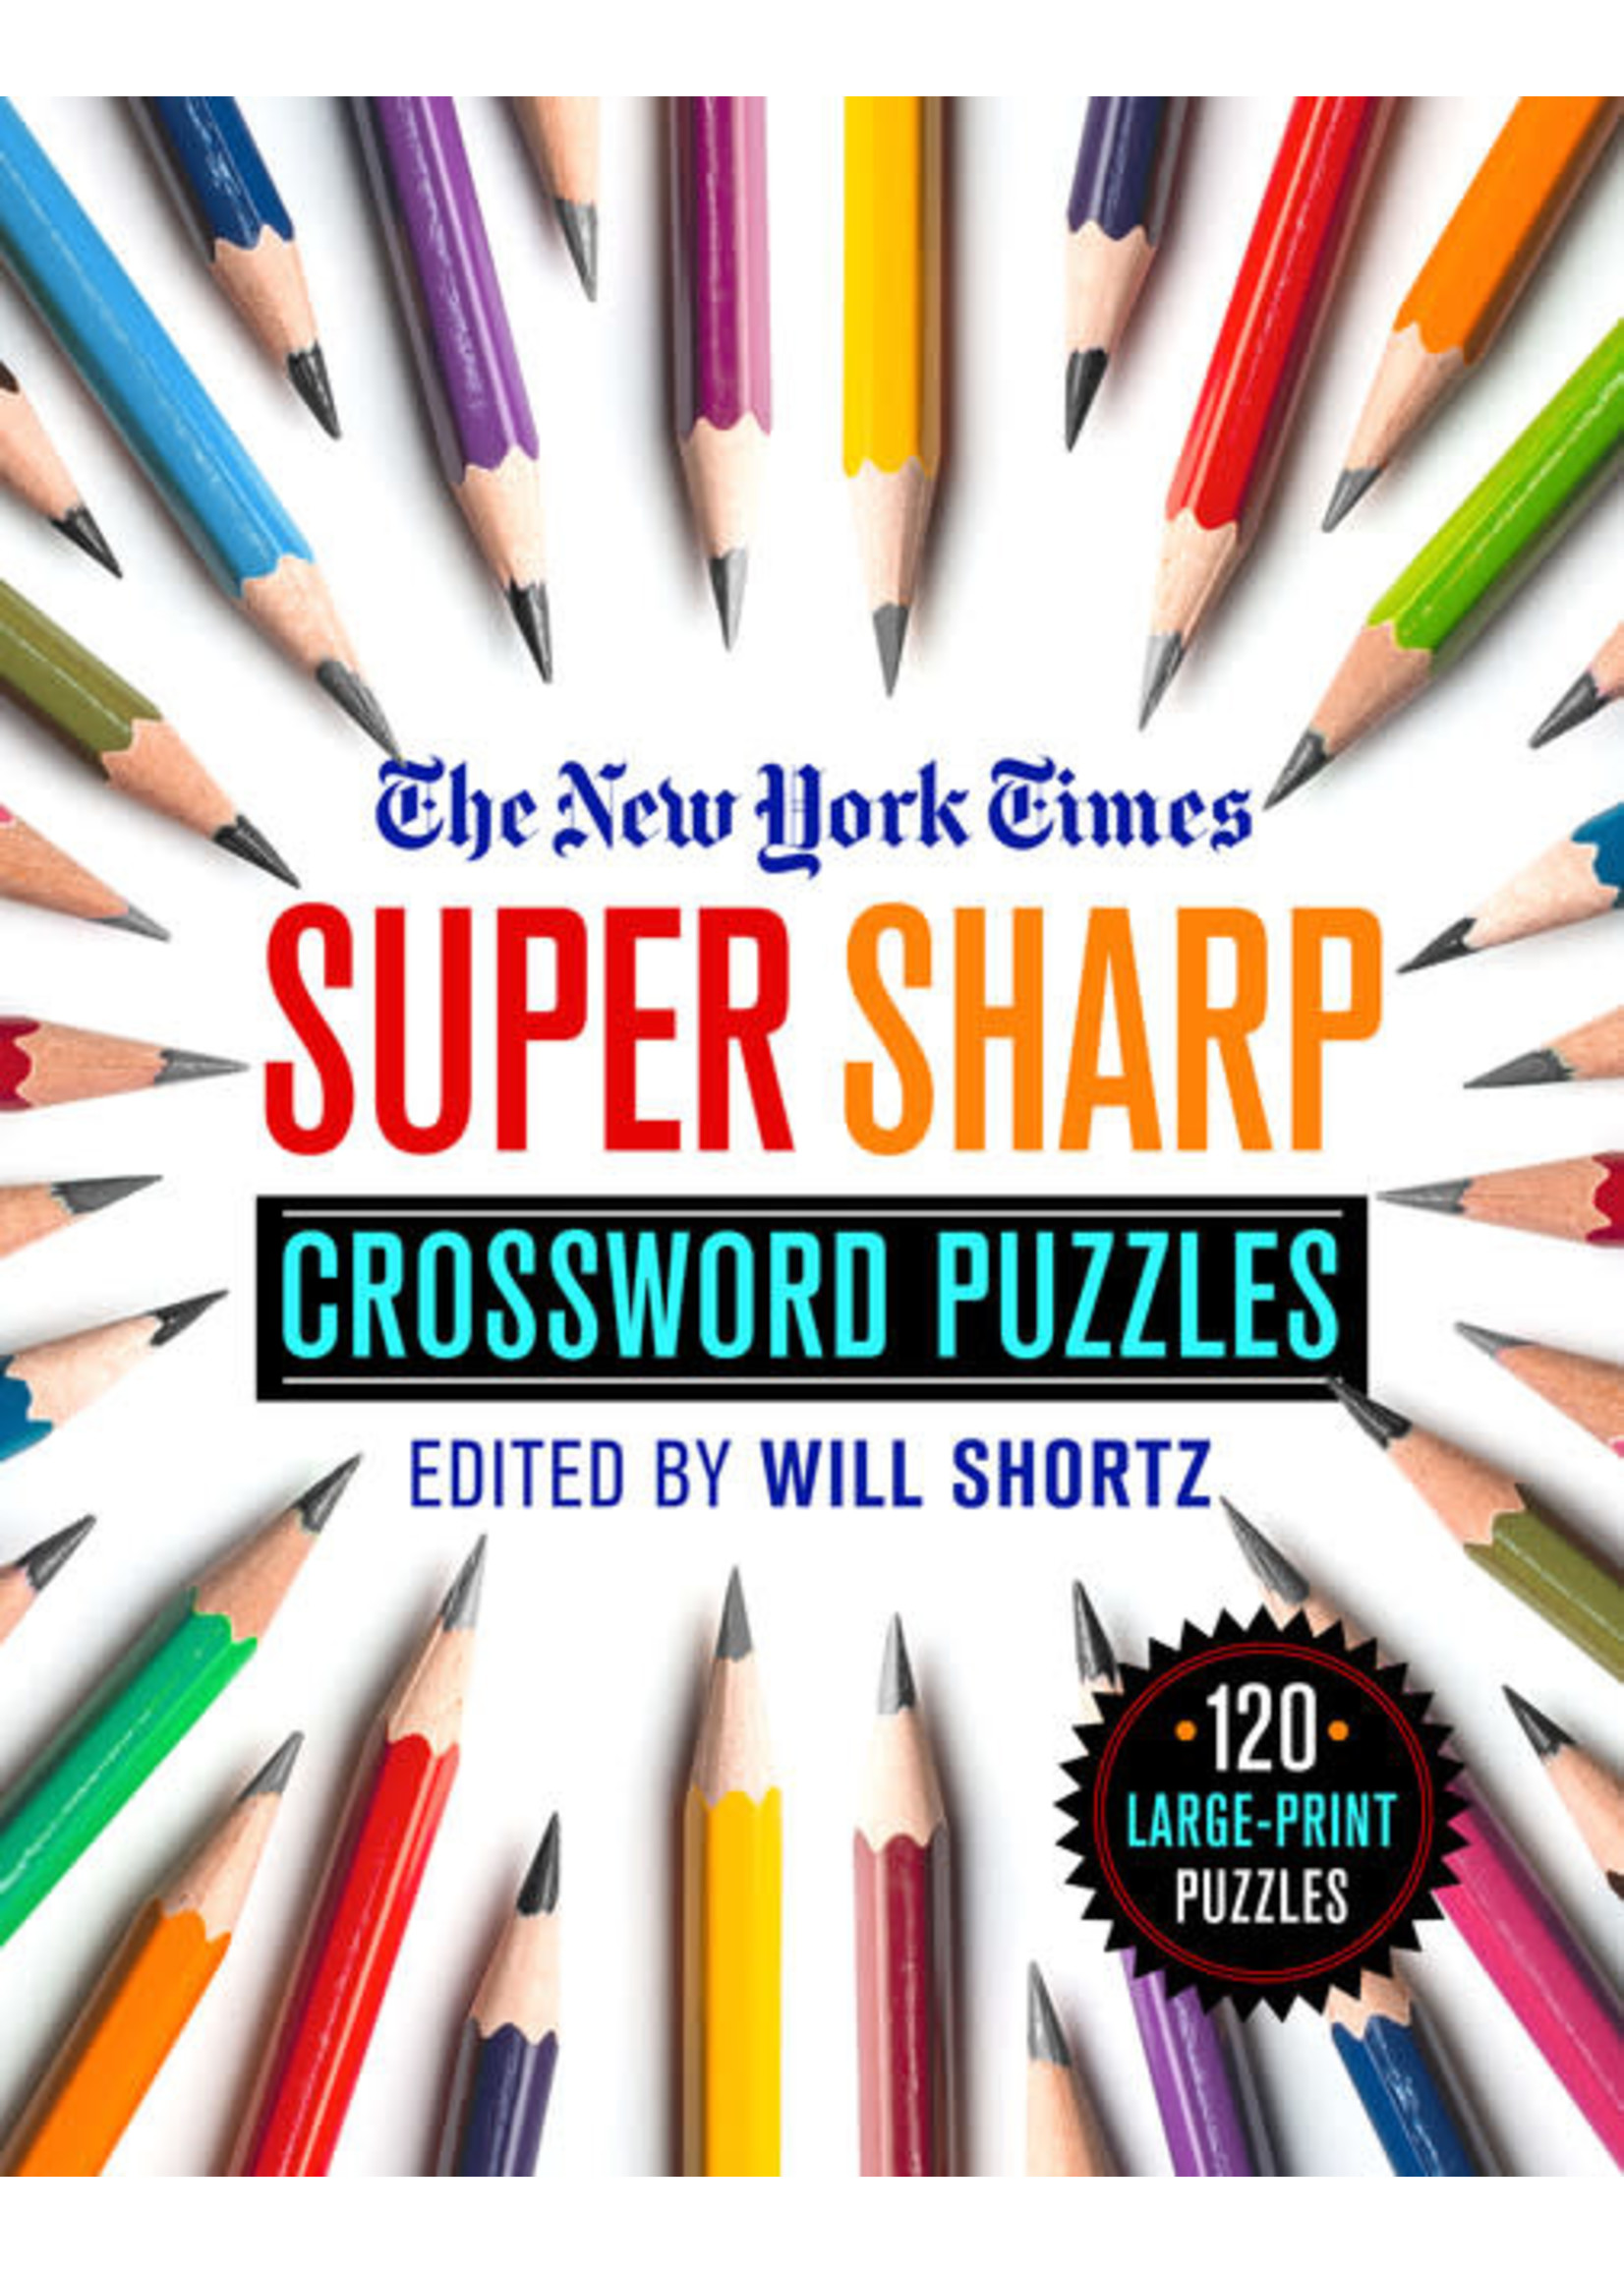 The New York Times Super Sharp Crossword Puzzles: 120 Large-Print Puzzles by The New York Times Edited by: Will Shortz